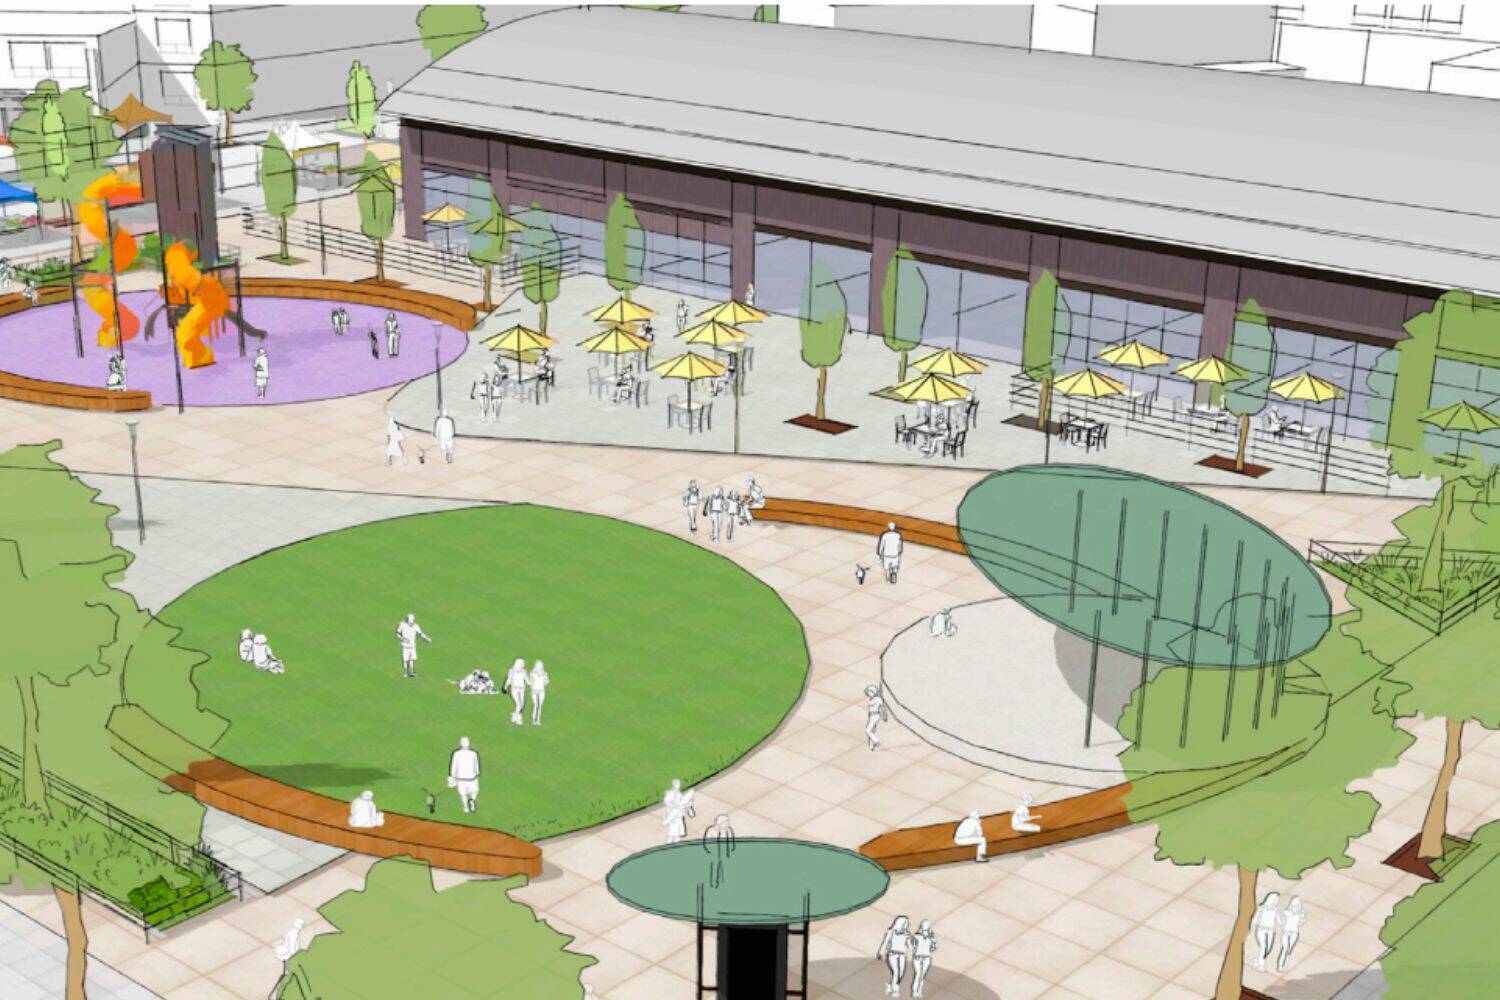 Screenshot from a report in the 2023-2025 Capital Budget Request
Design rendering of the public square surrounding the renovated Pavilion Building.